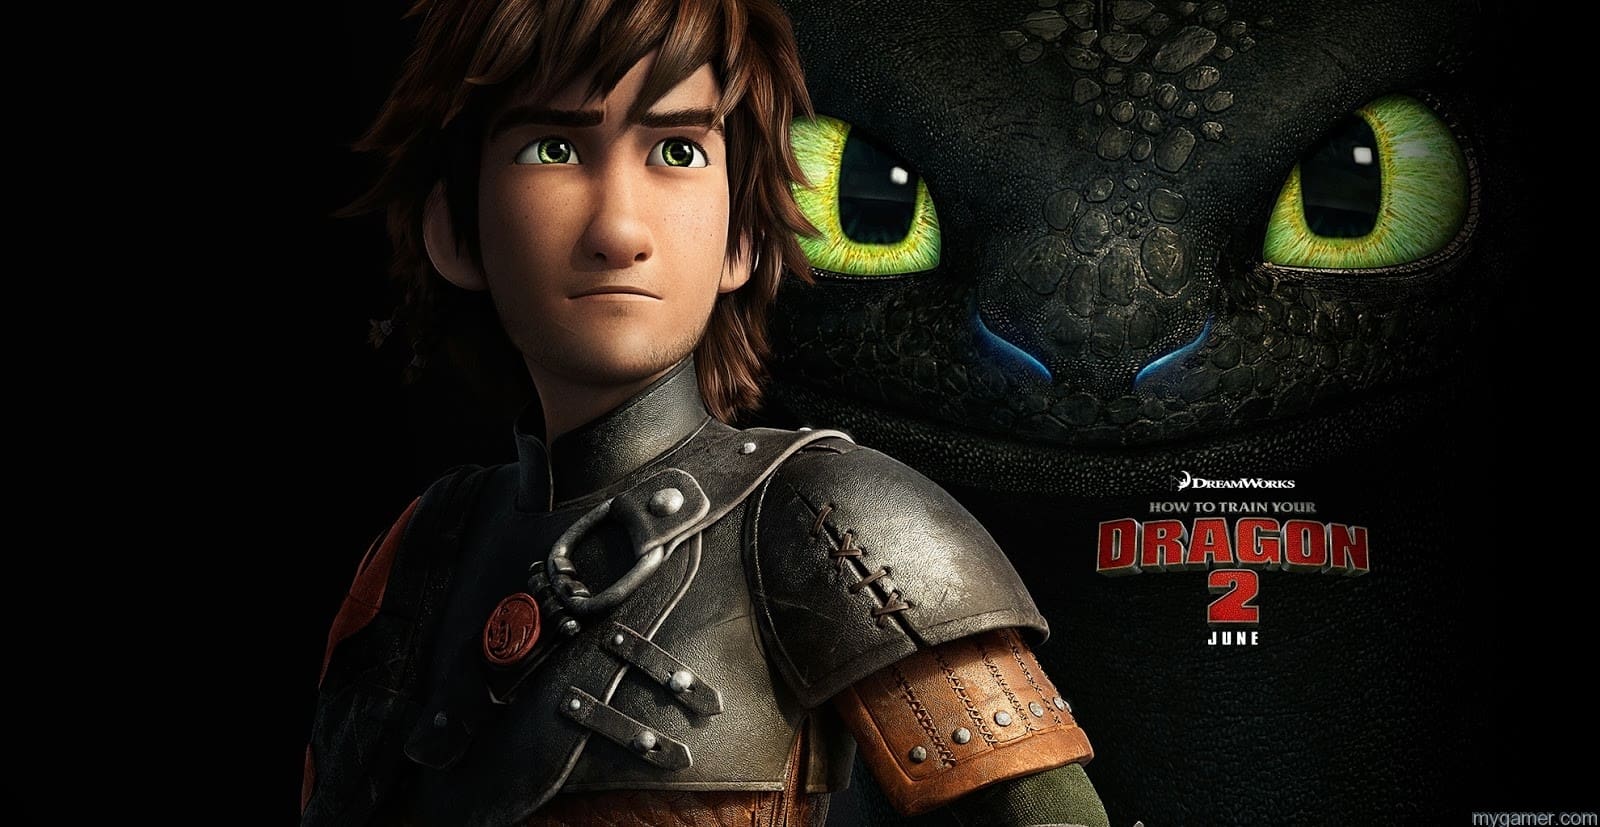 how to train your dragon image how to train your dragon 36215030 1600 827